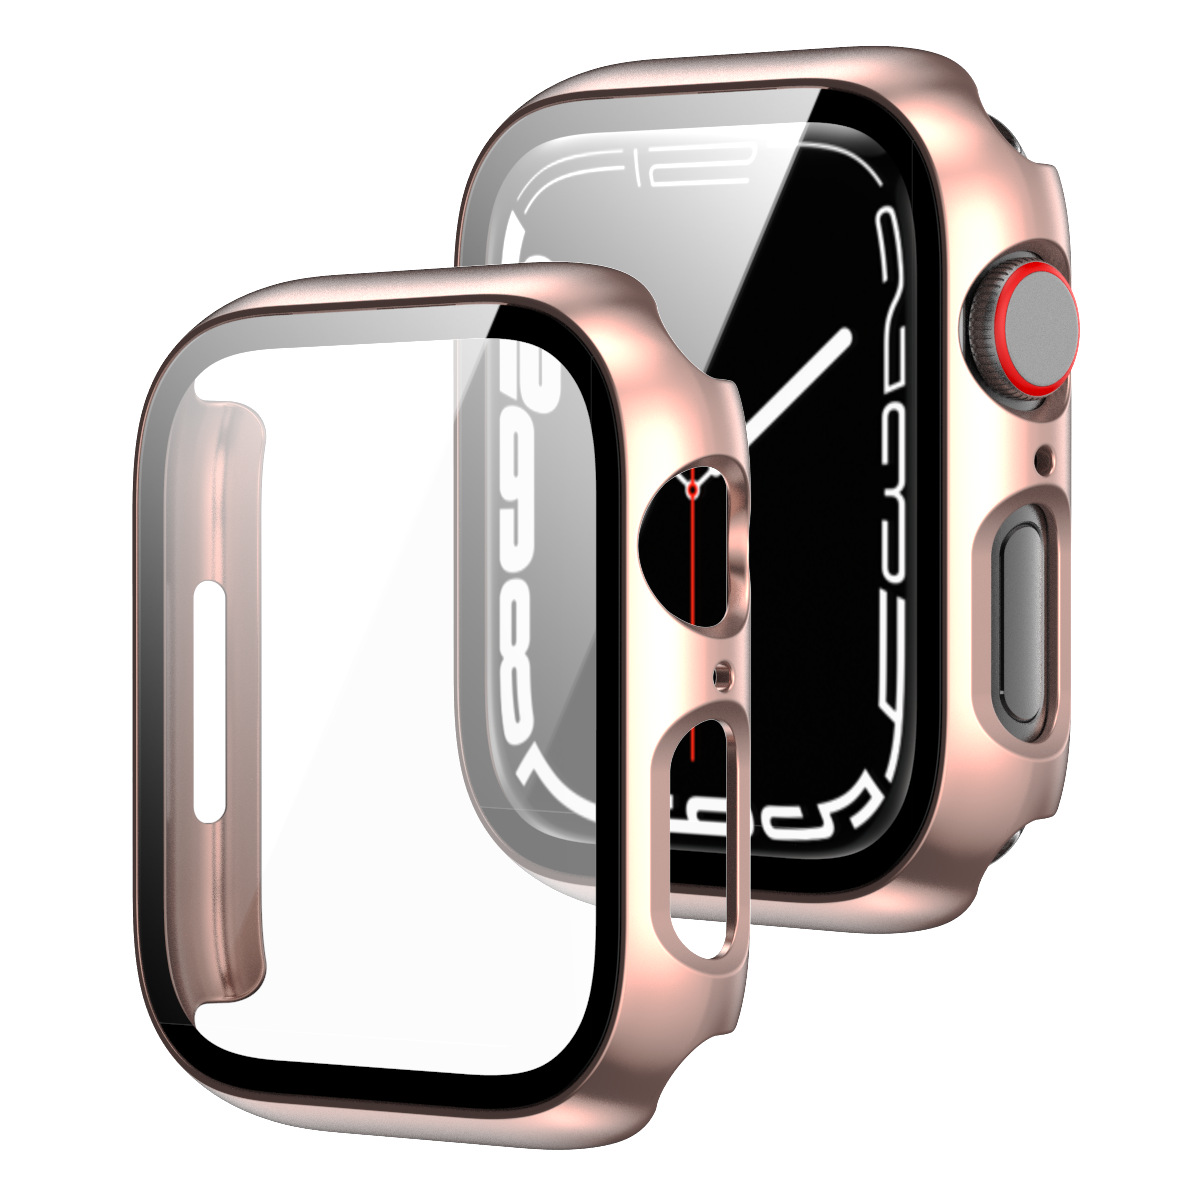 For Apple Watch Case PC All-in-One Case Apple Watch9 Protective Case iWatch Tempered Glass Film